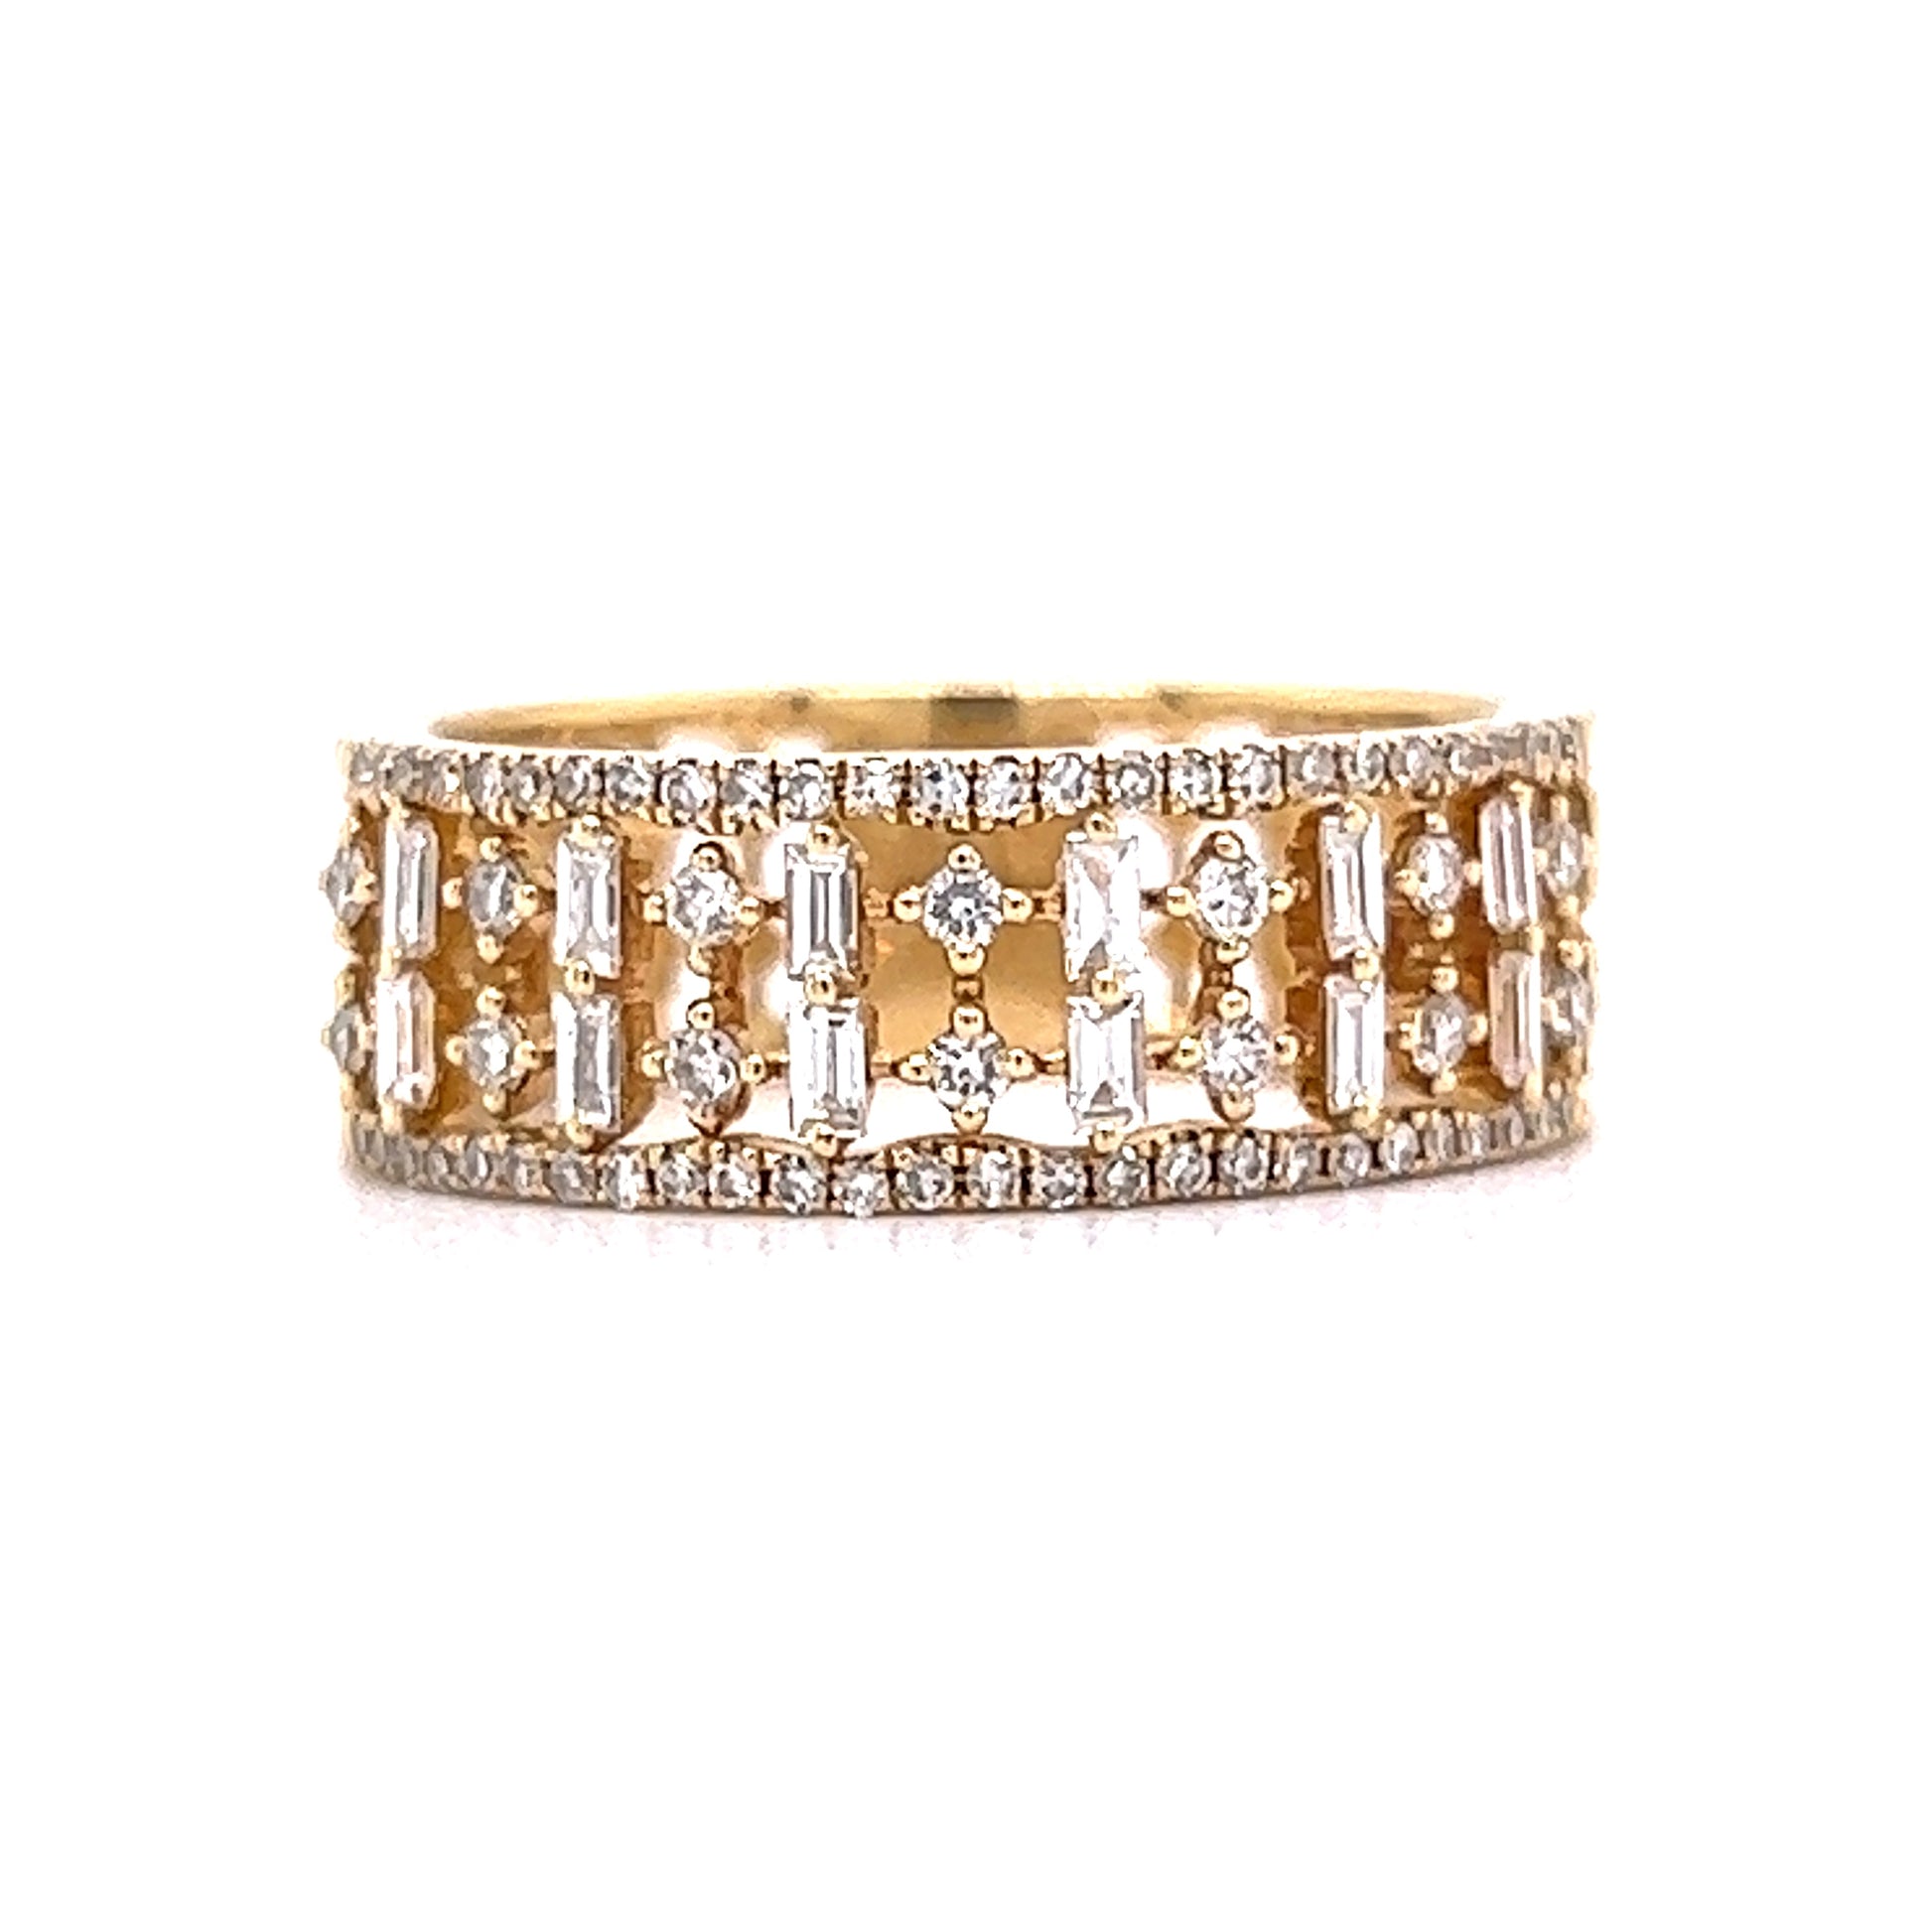 Thick Pave Diamond Cocktail Ring 14k Yellow GoldComposition: 14 Karat Yellow Gold Ring Size: 7.25 Total Diamond Weight: .70ct Total Gram Weight: 3.5 g Inscription: 14k 585
      